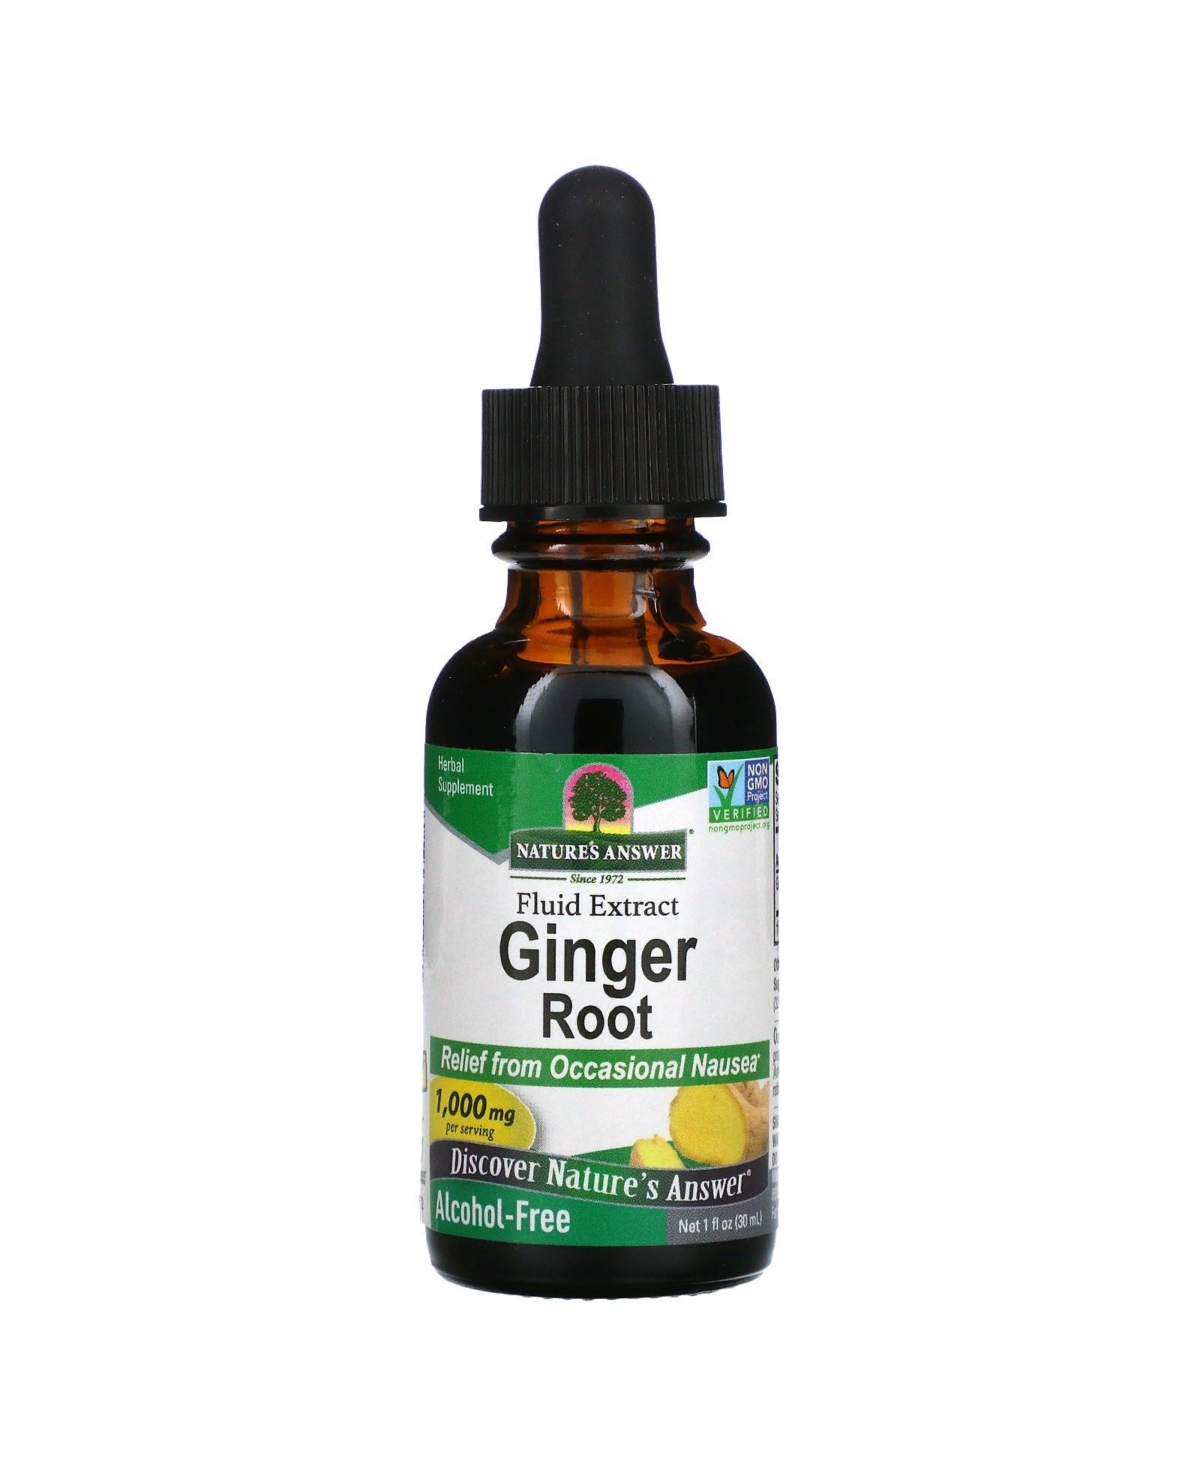 Ginger Root Fluid Extract Alcohol-Free 1 000 mg - 1 fl oz (30 ml) - Assorted Pre-pack (See Table